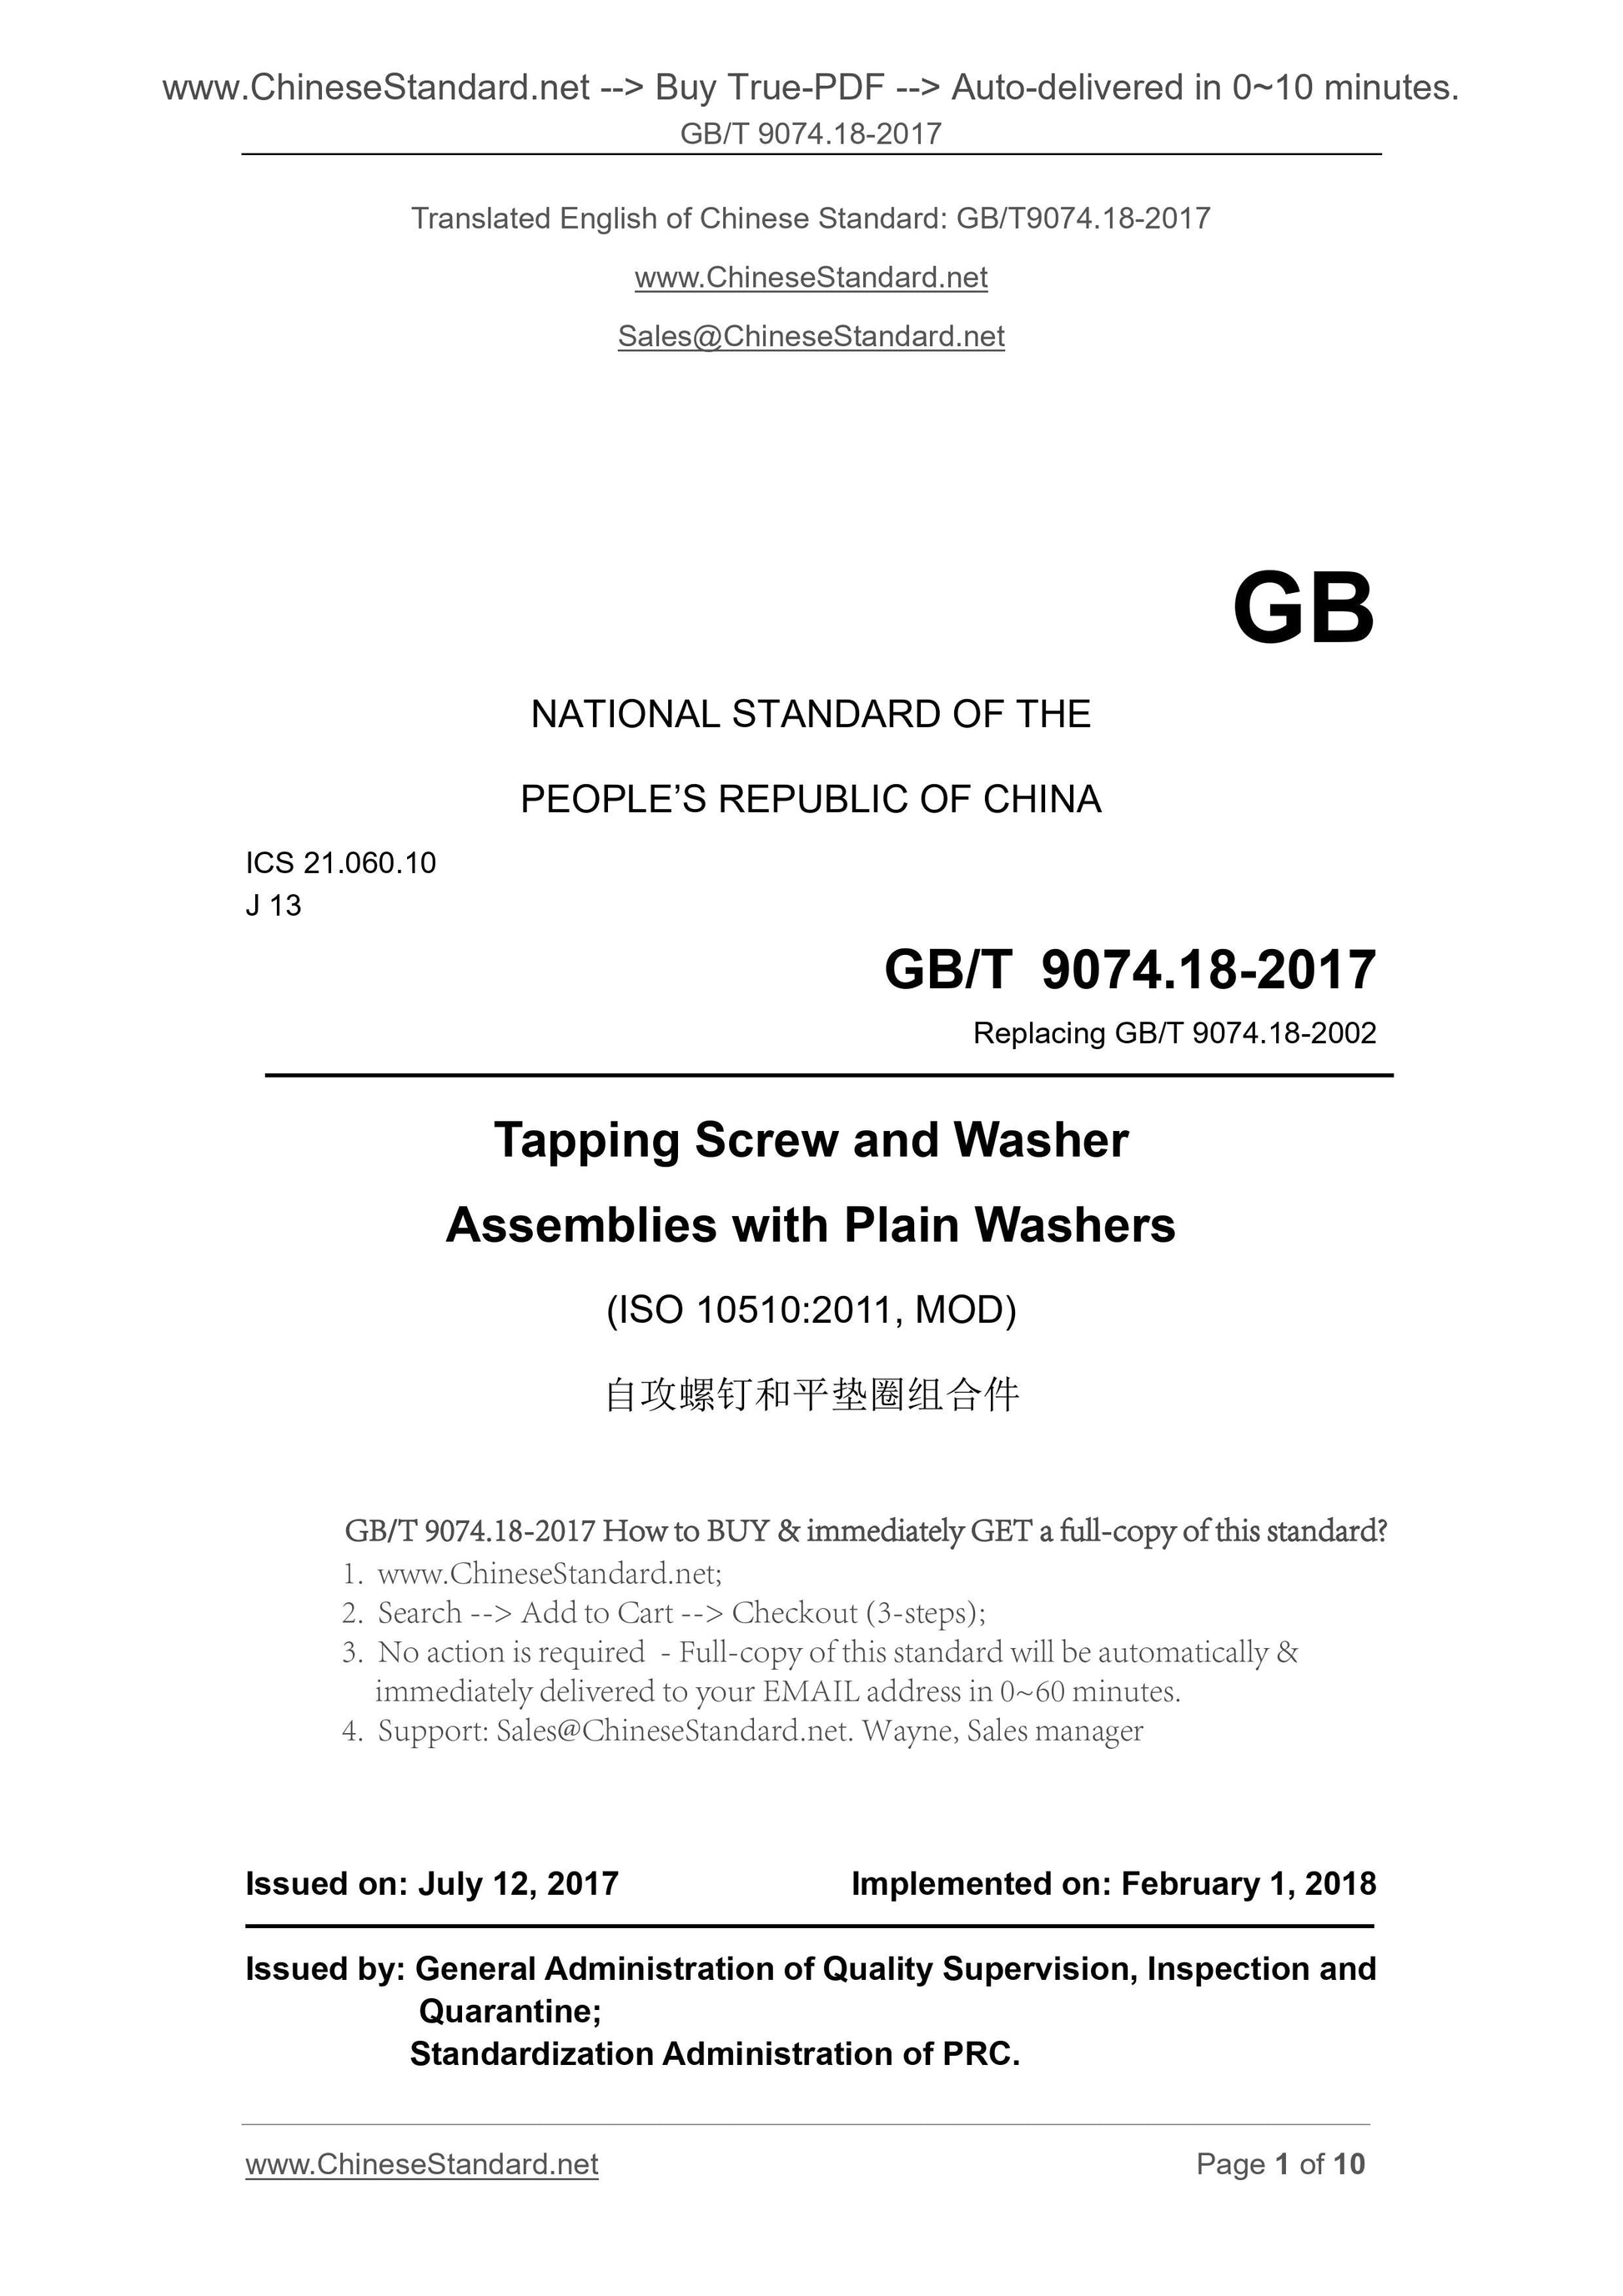 GB/T 9074.18-2017 Page 1